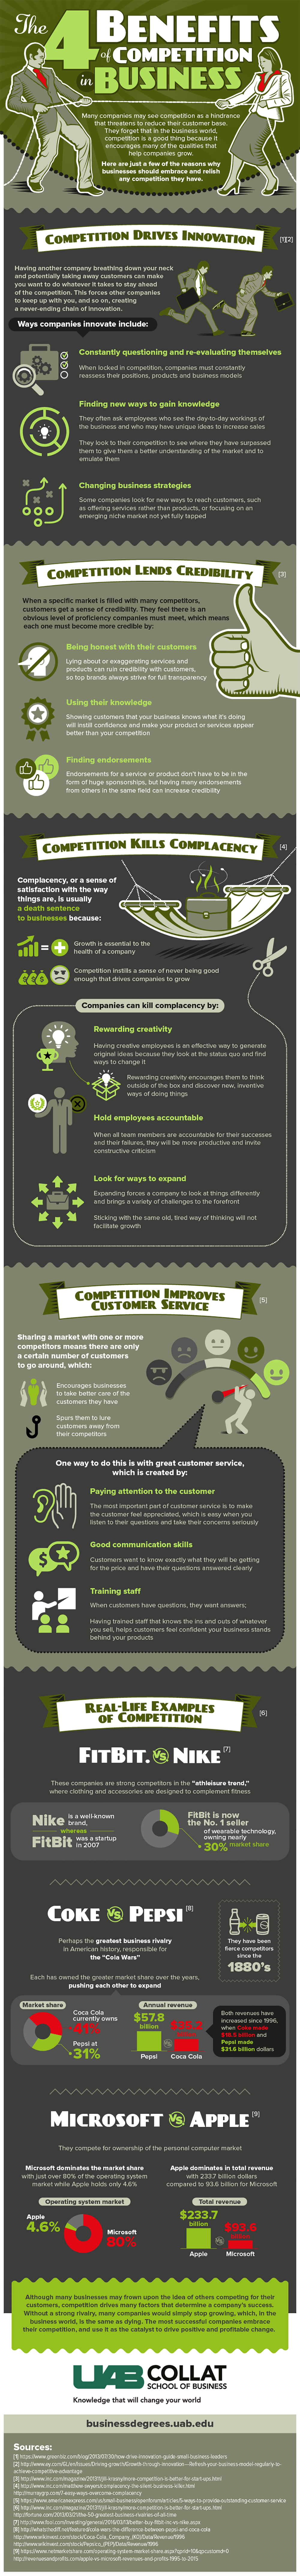 An infographic about the benefits of business competition by UAB Collat School of Business.